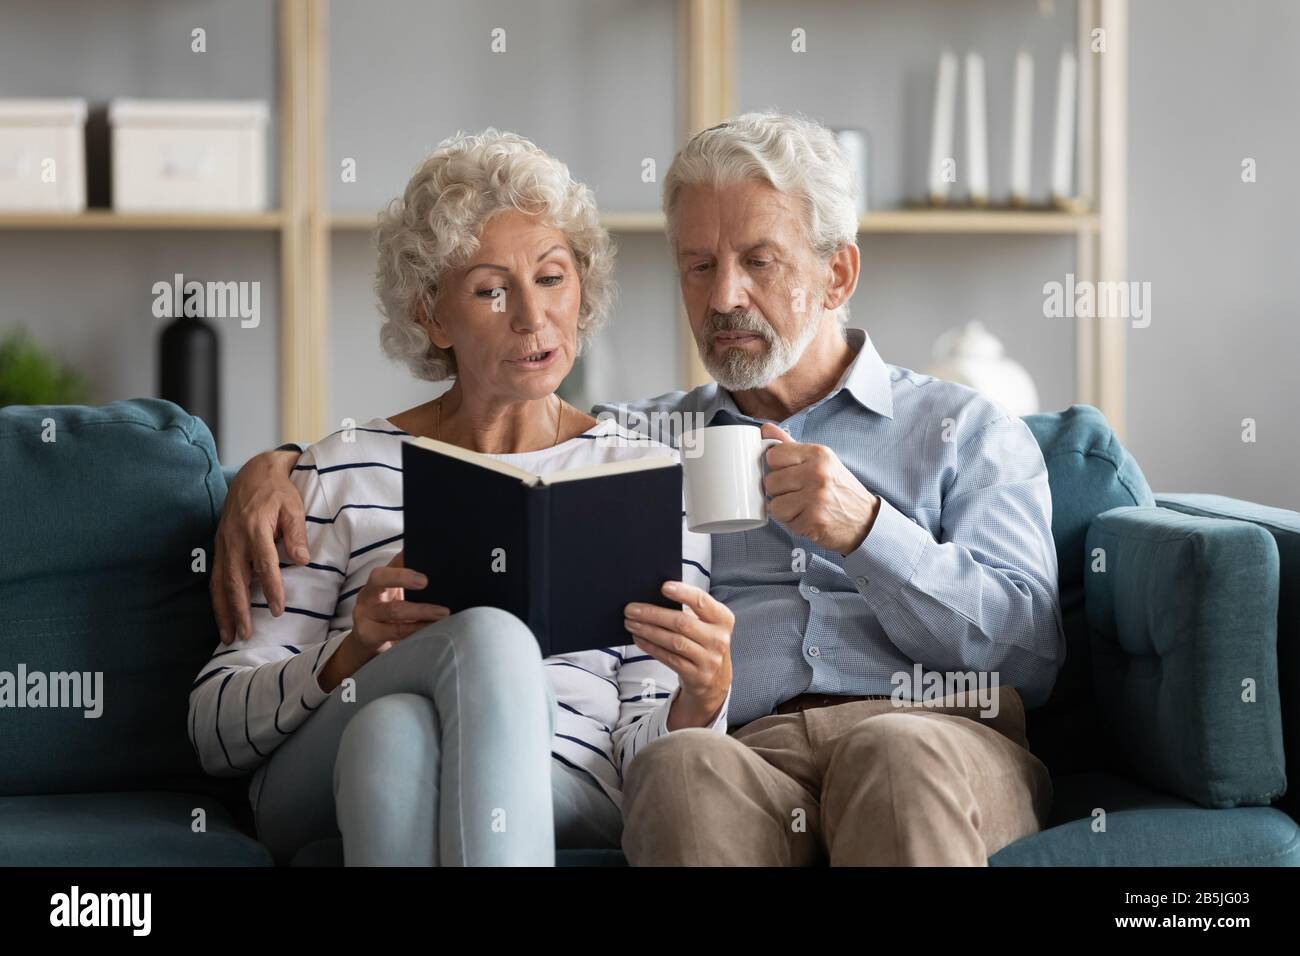 Elderly 60s couple relax on couch reading book together Stock Photo